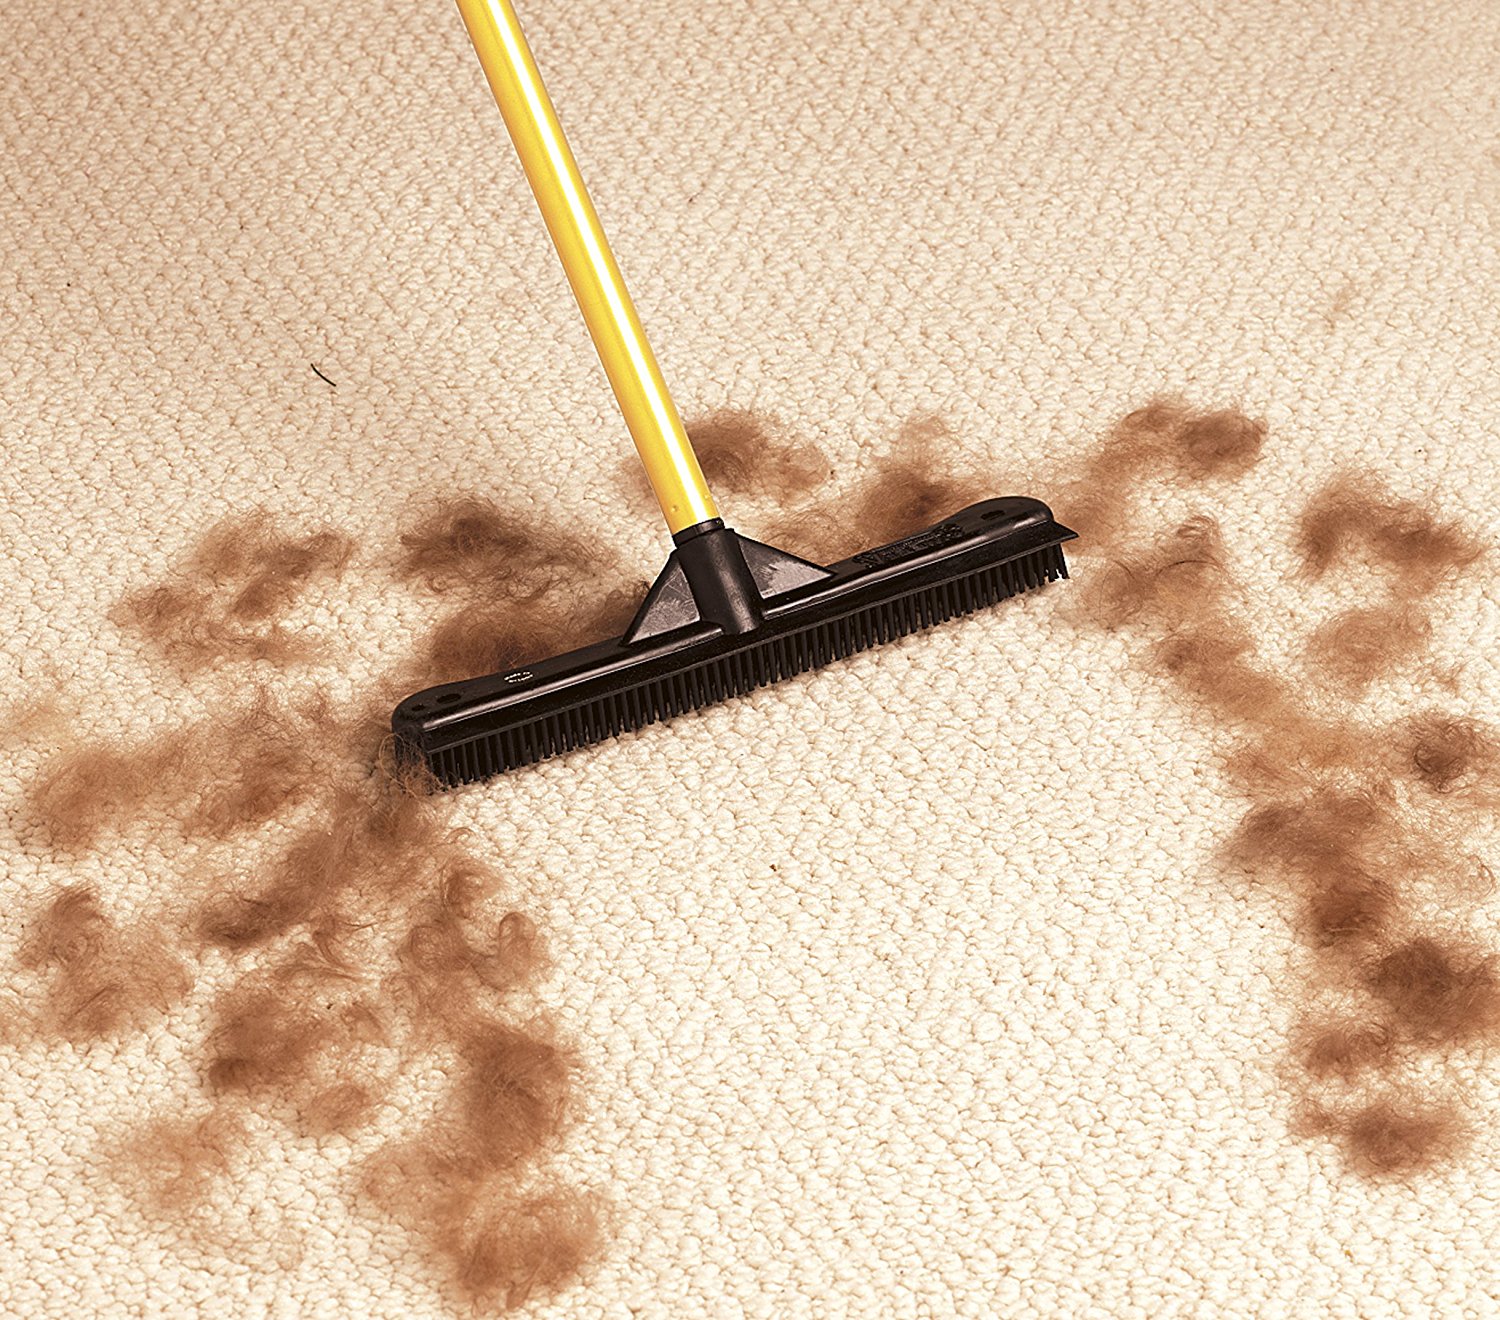 A broom to remove dog hair fur from carpets, hardwood floors, and clothes. Great for the car.